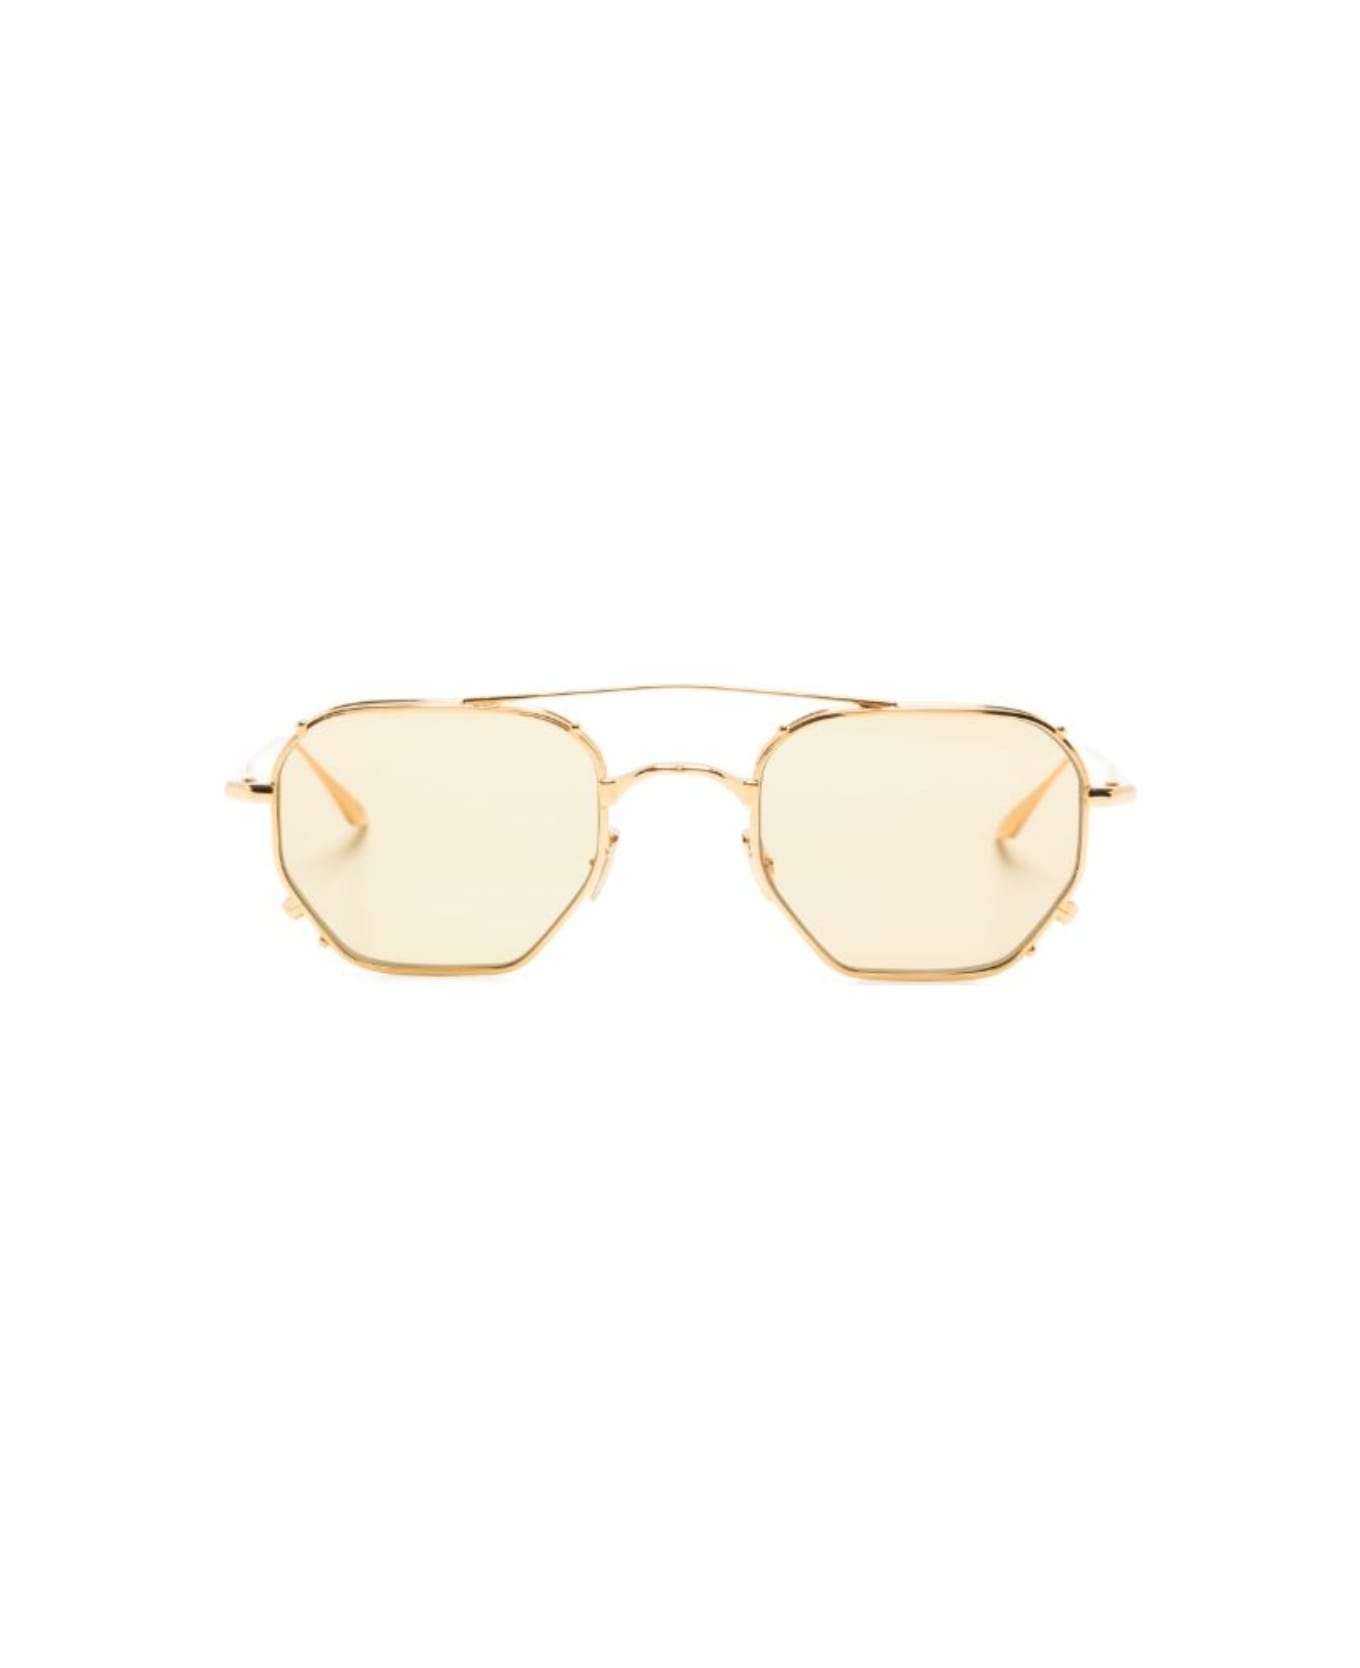 Jacques Marie Mage Marbot Sunglasses